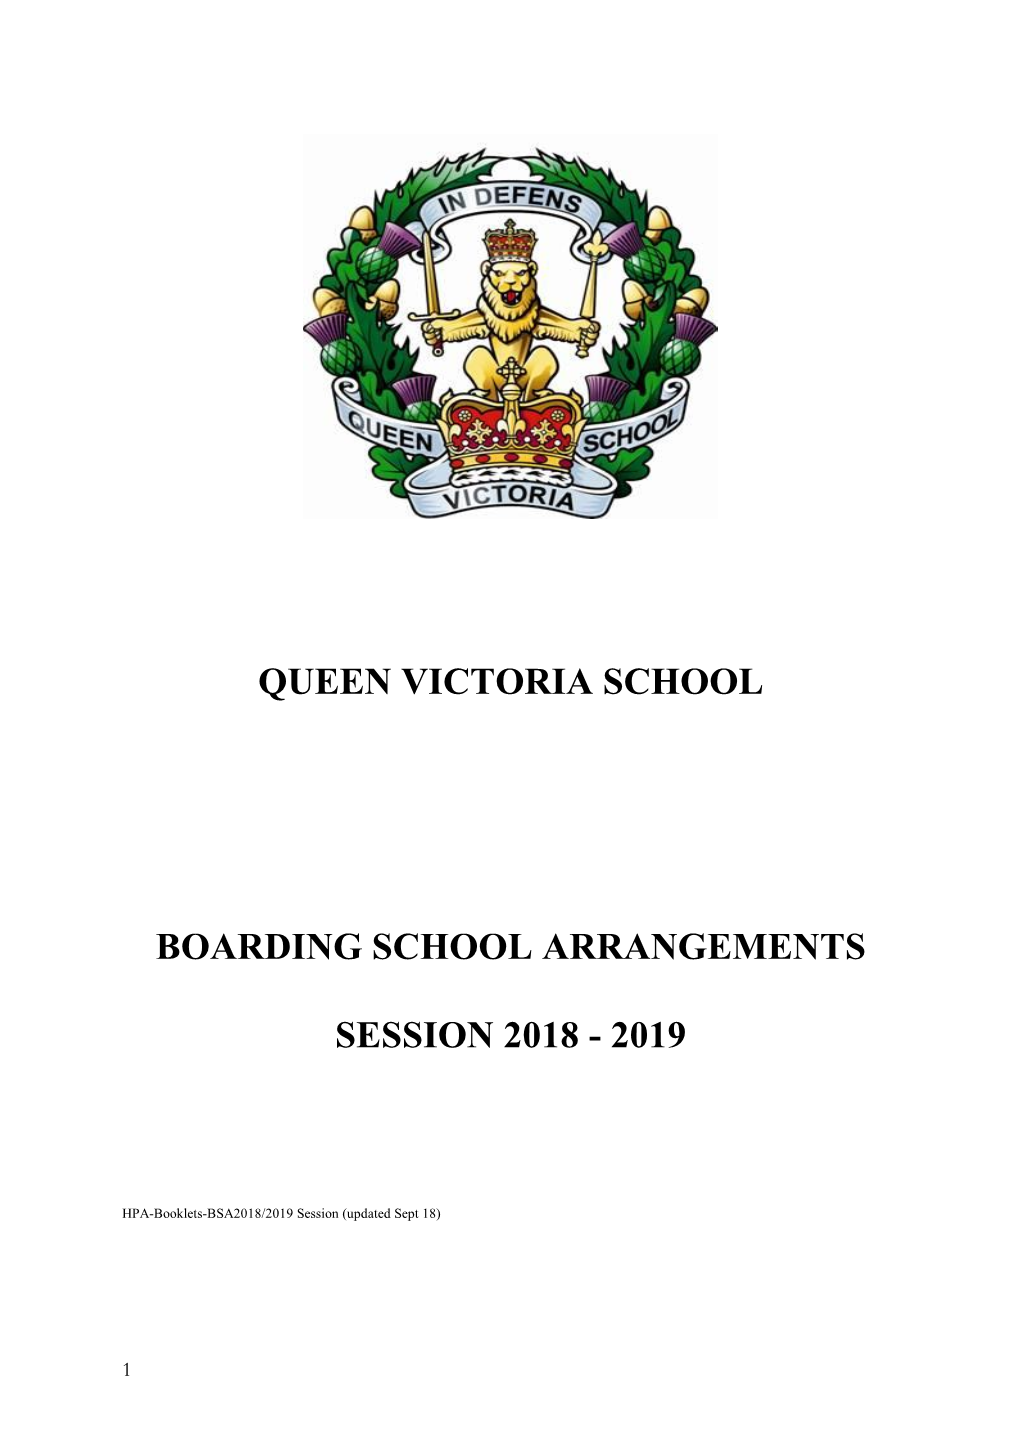 BSA Booklet Session 2018-2019 Updated